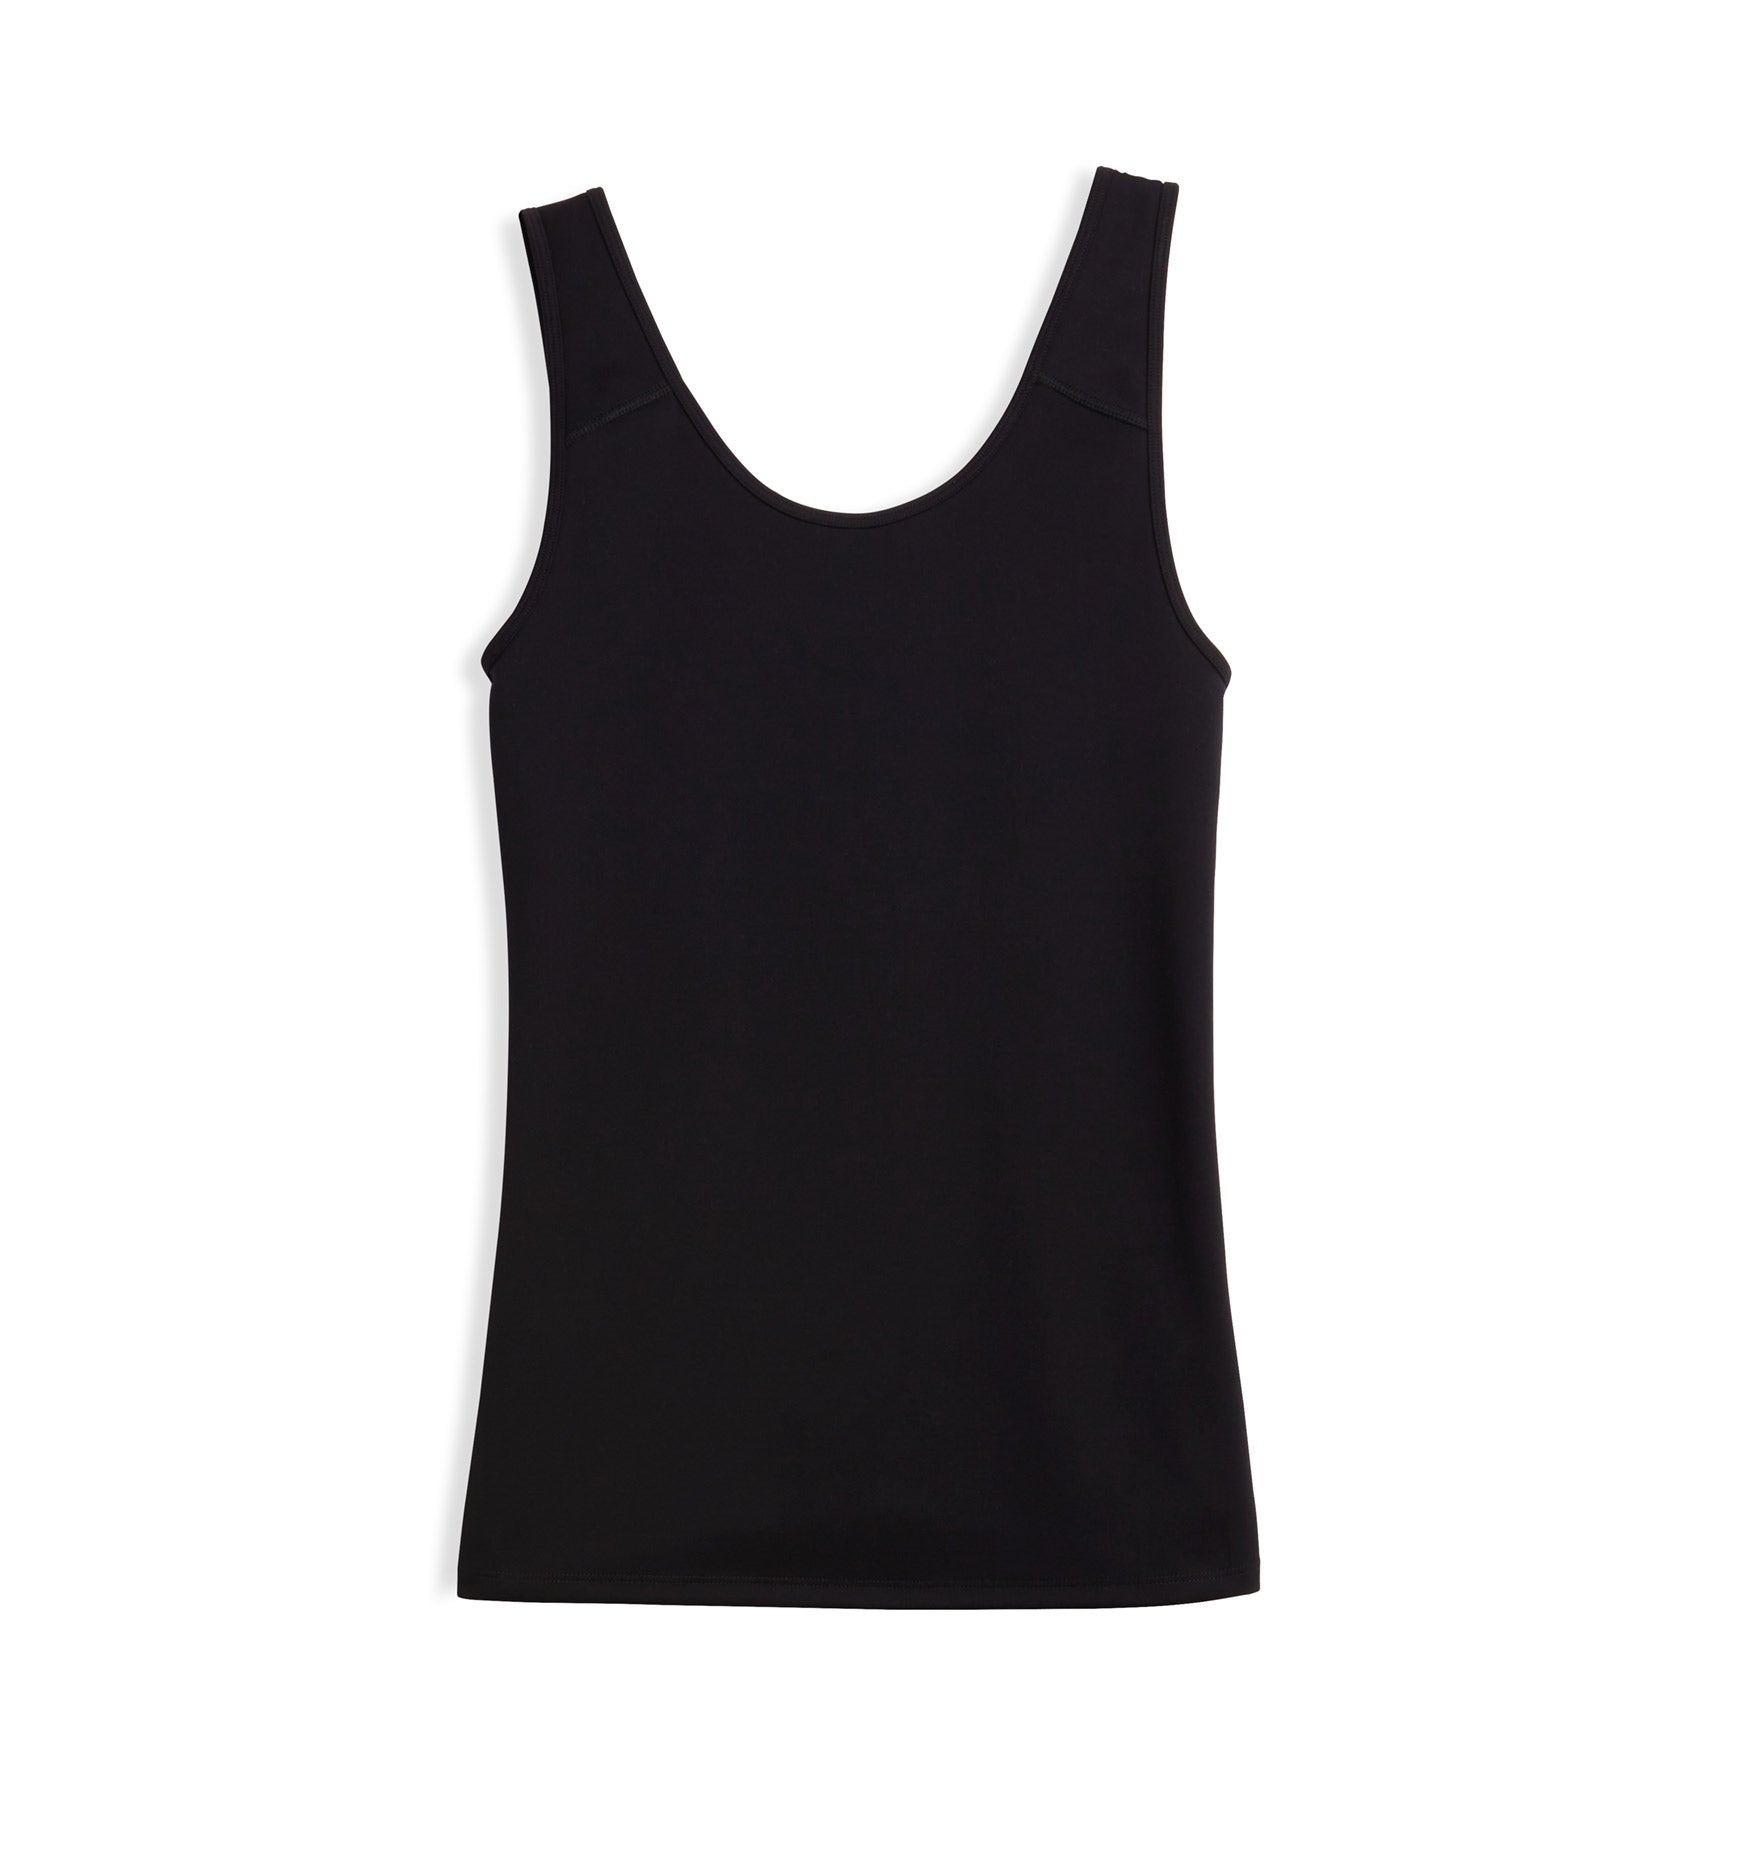 Target's TomboyX Chest Binder Compression Top Hides My 32G Boobs